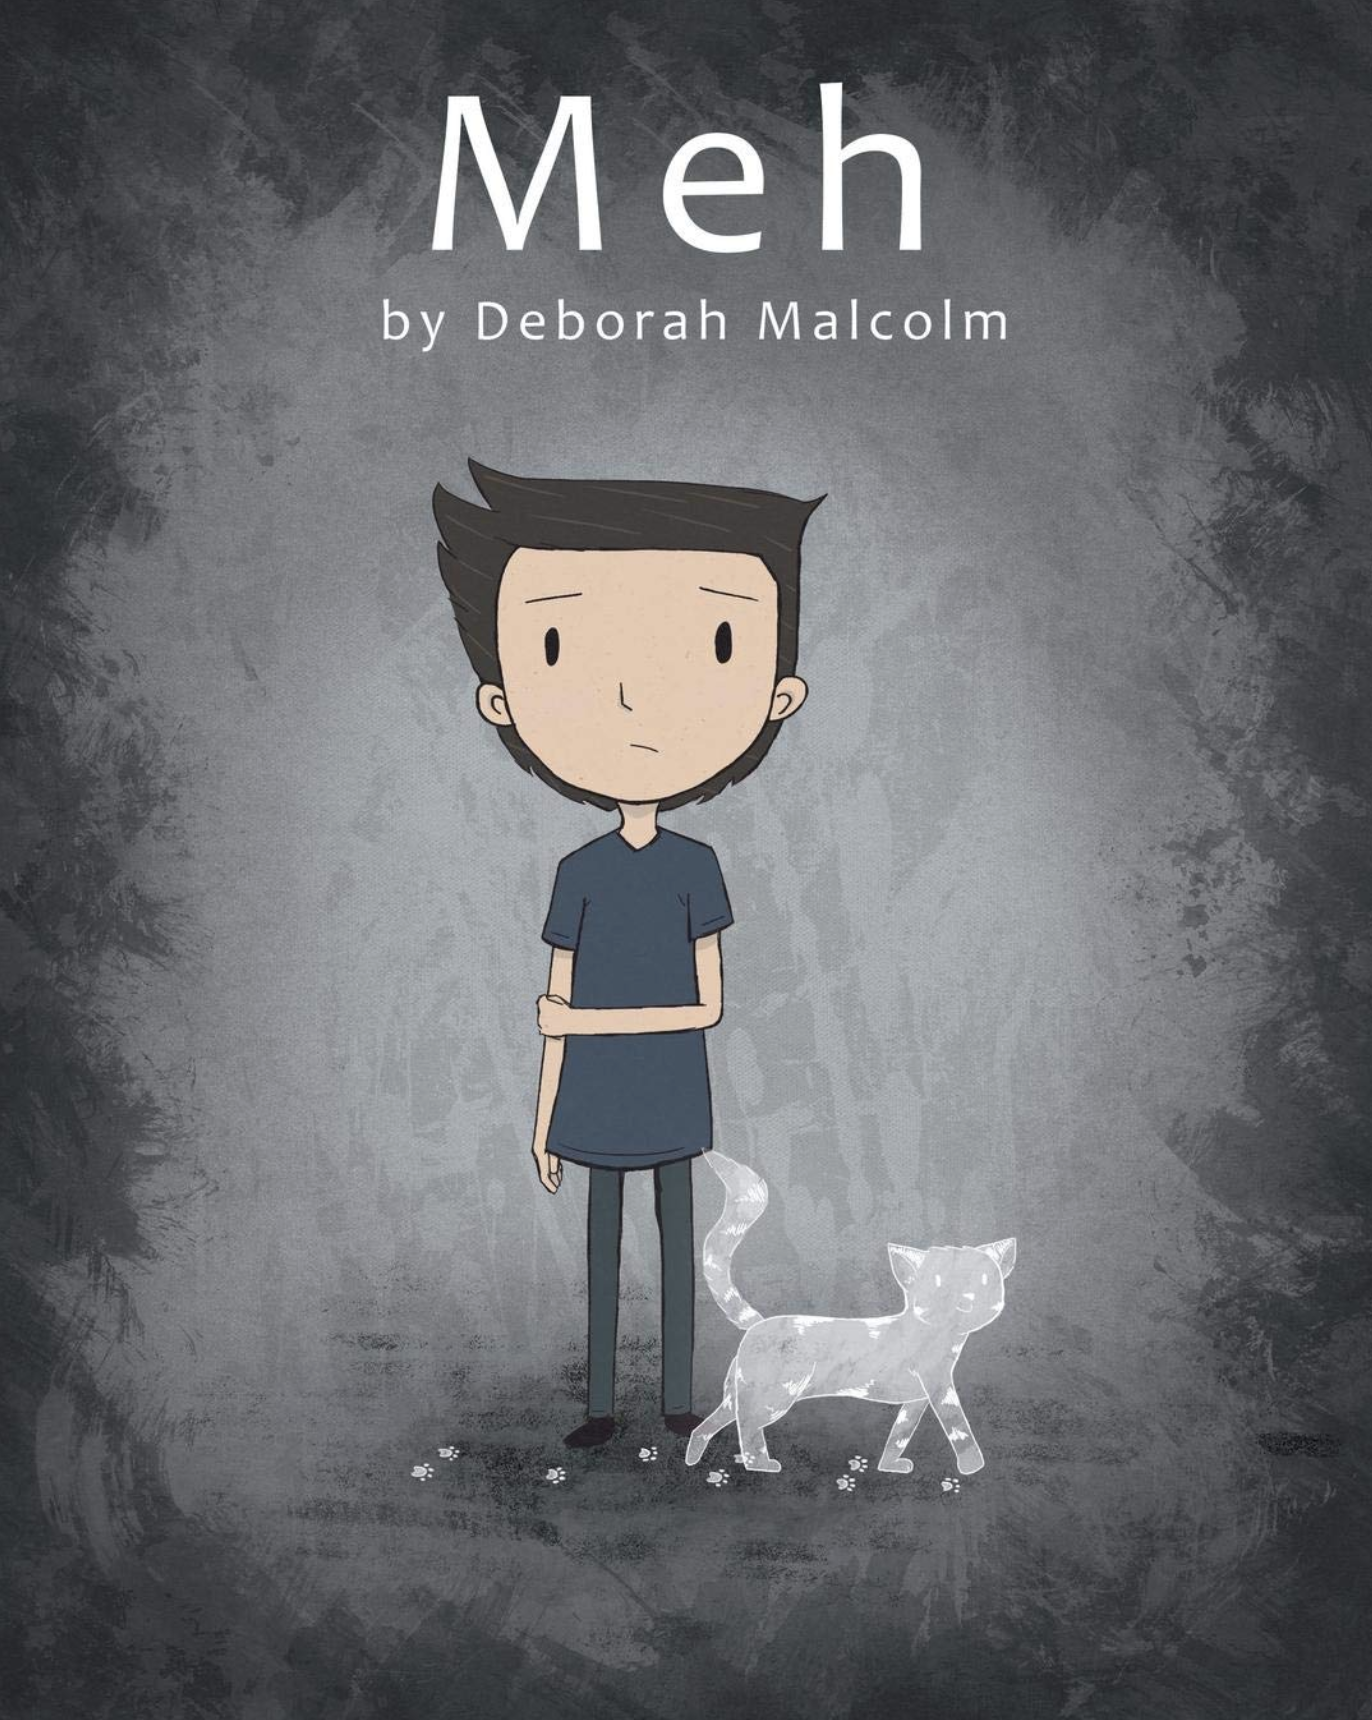 Book cover image of Meh, a young boy standing next to a cat at his feet with a dark gray background